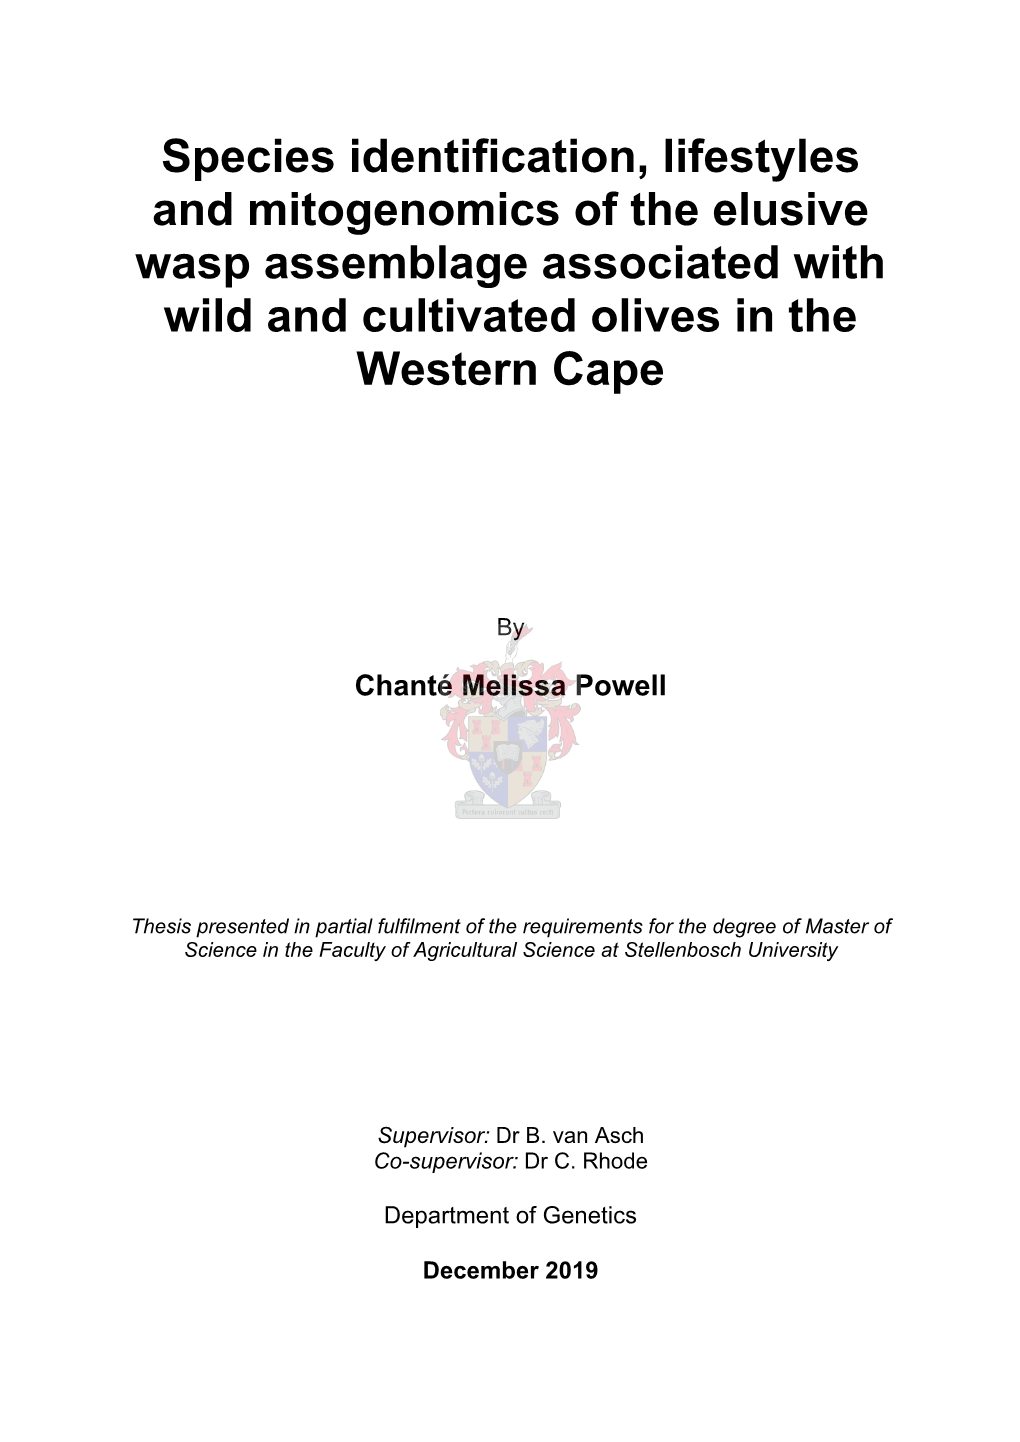 Species Identification, Lifestyles and Mitogenomics of the Elusive Wasp Assemblage Associated with Wild and Cultivated Olives in the Western Cape